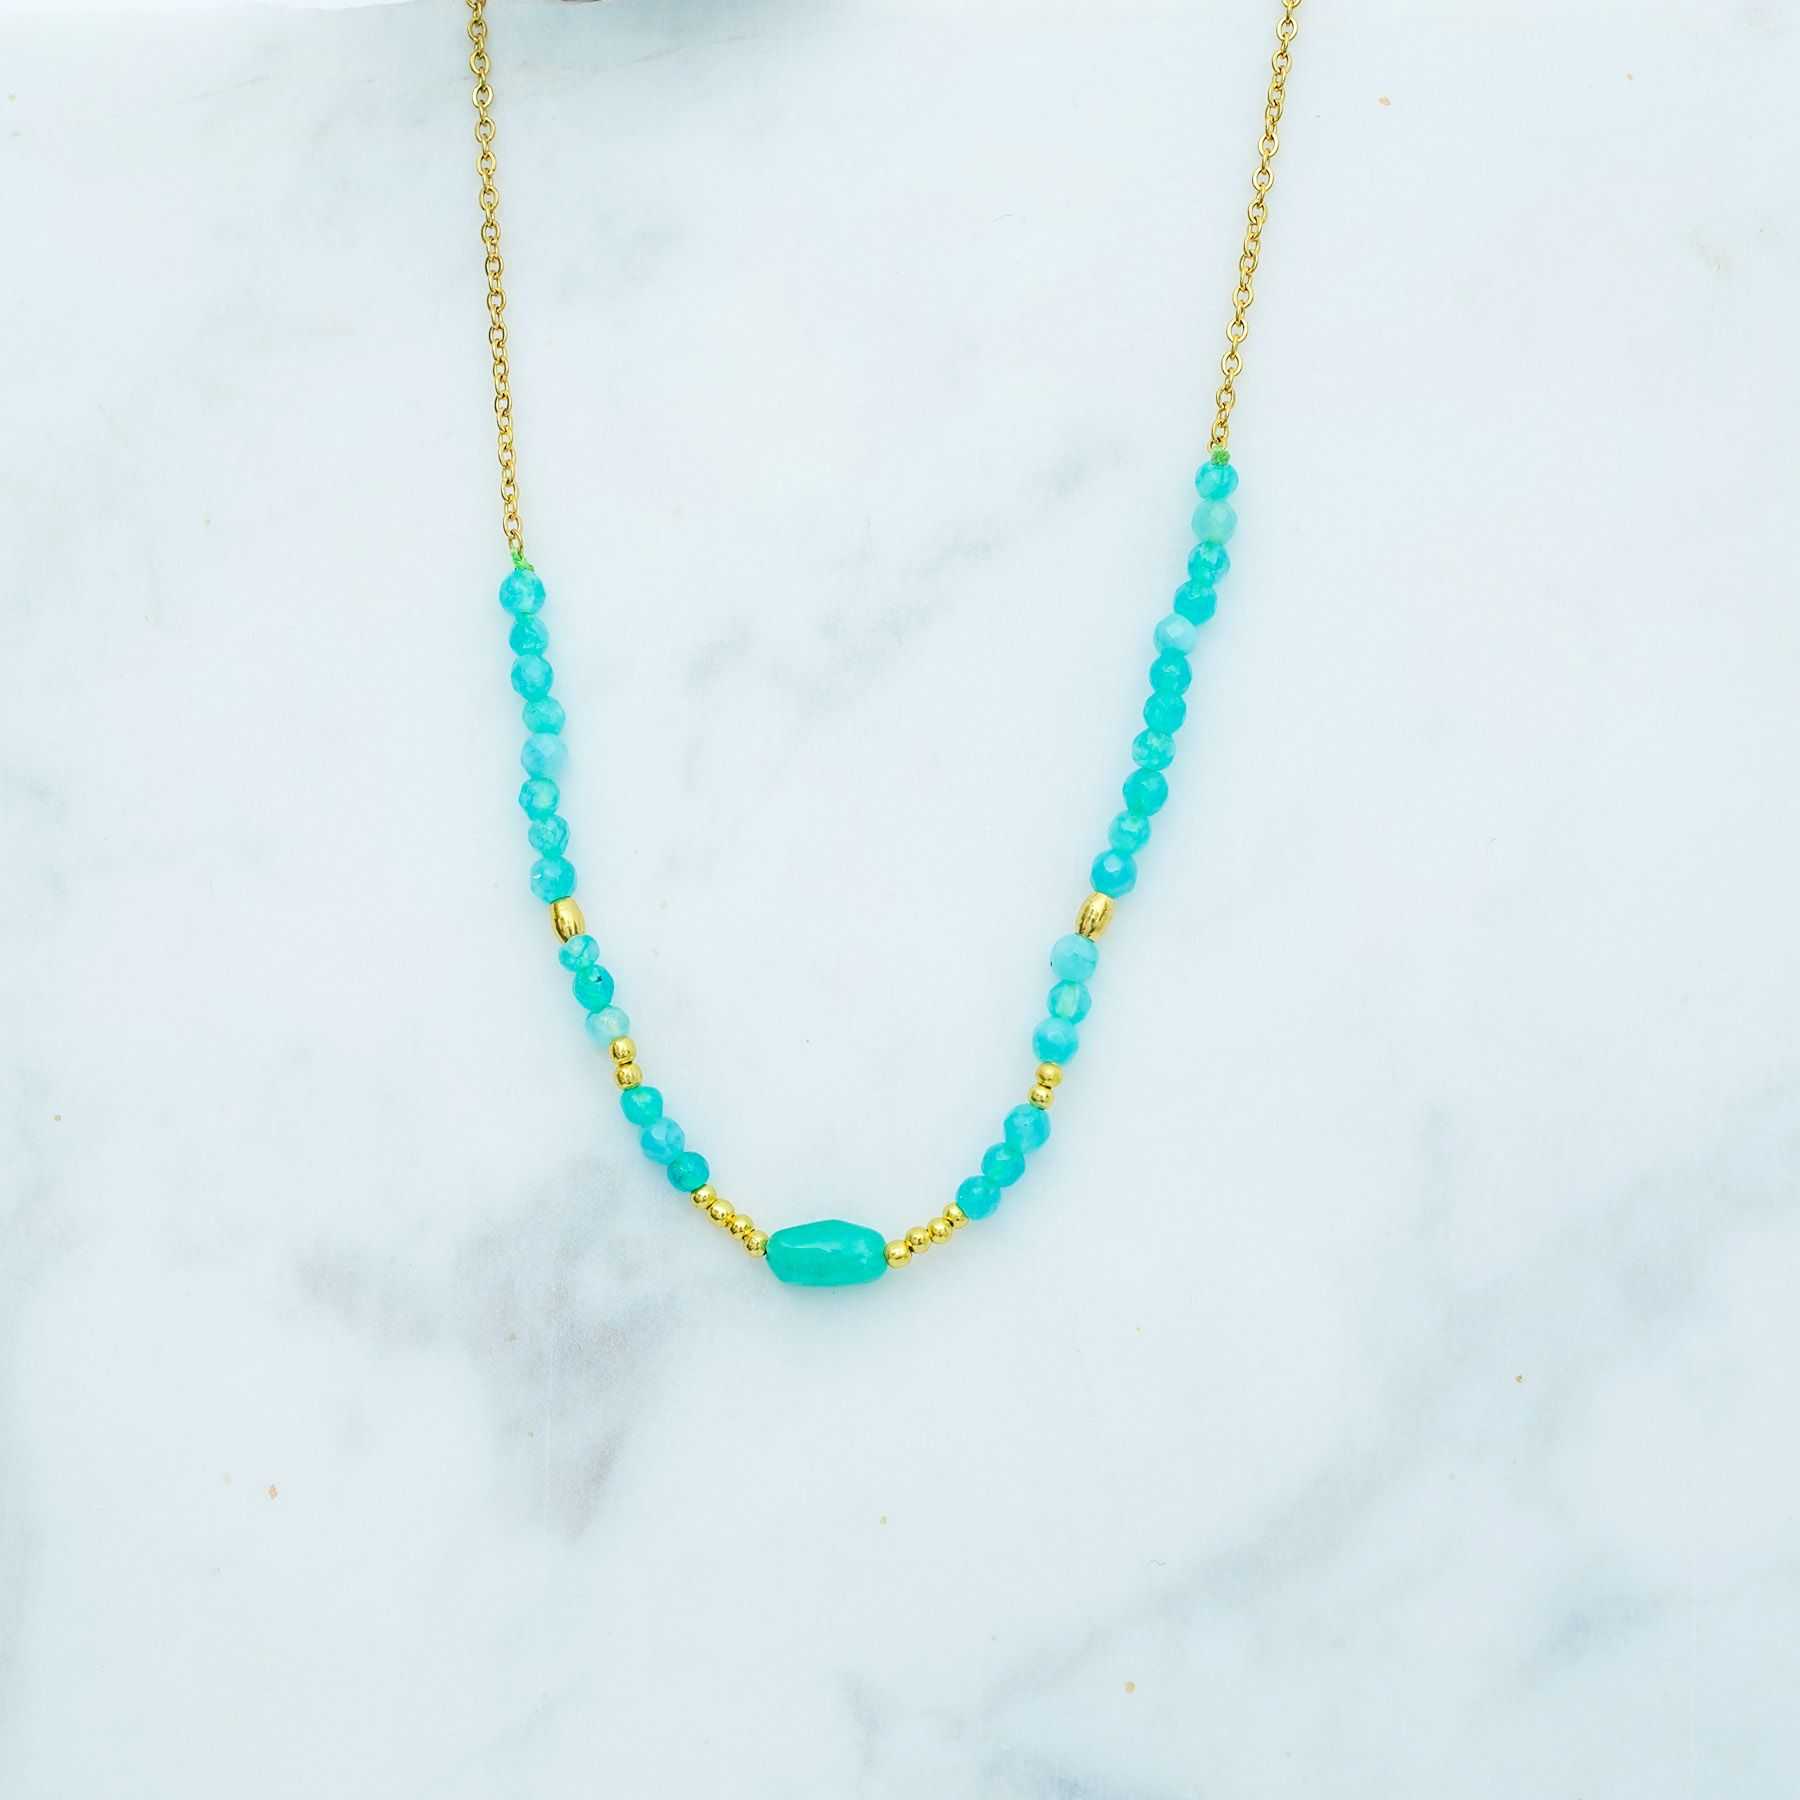 HAWAII NECKLACE - GOLD & BLUE